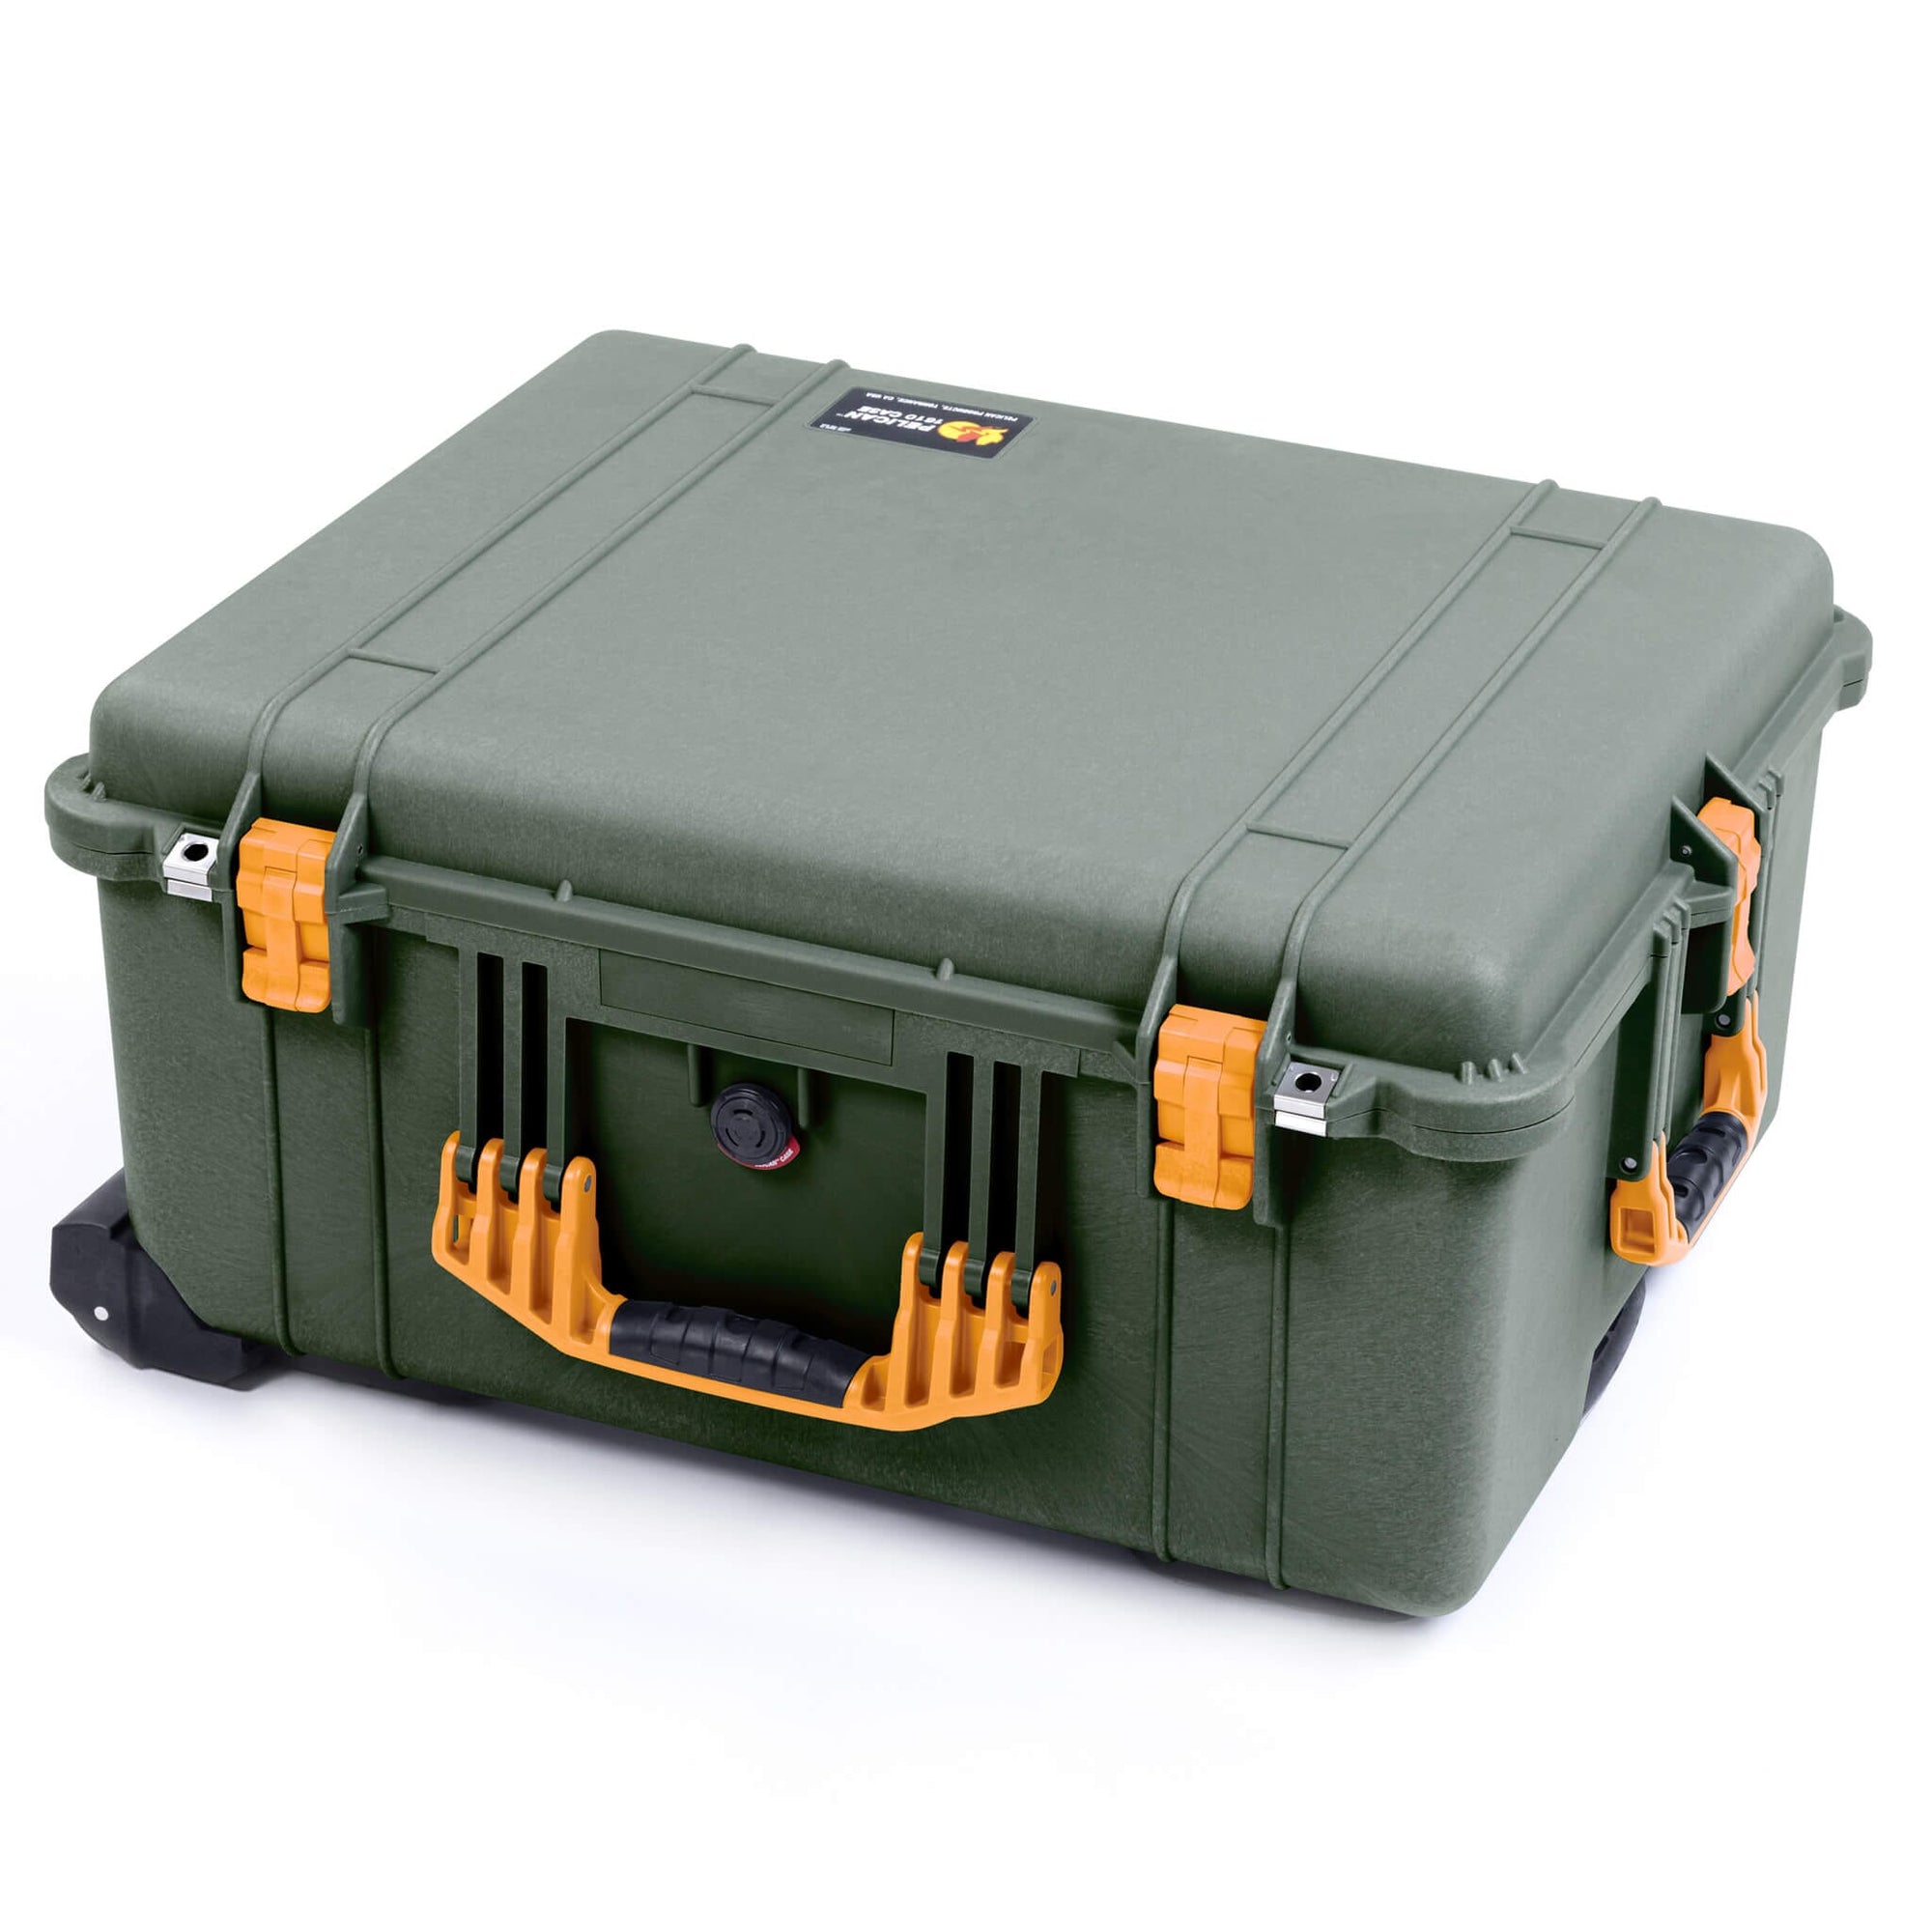 Pelican 1610 Case, OD Green with Yellow Handles and Latches